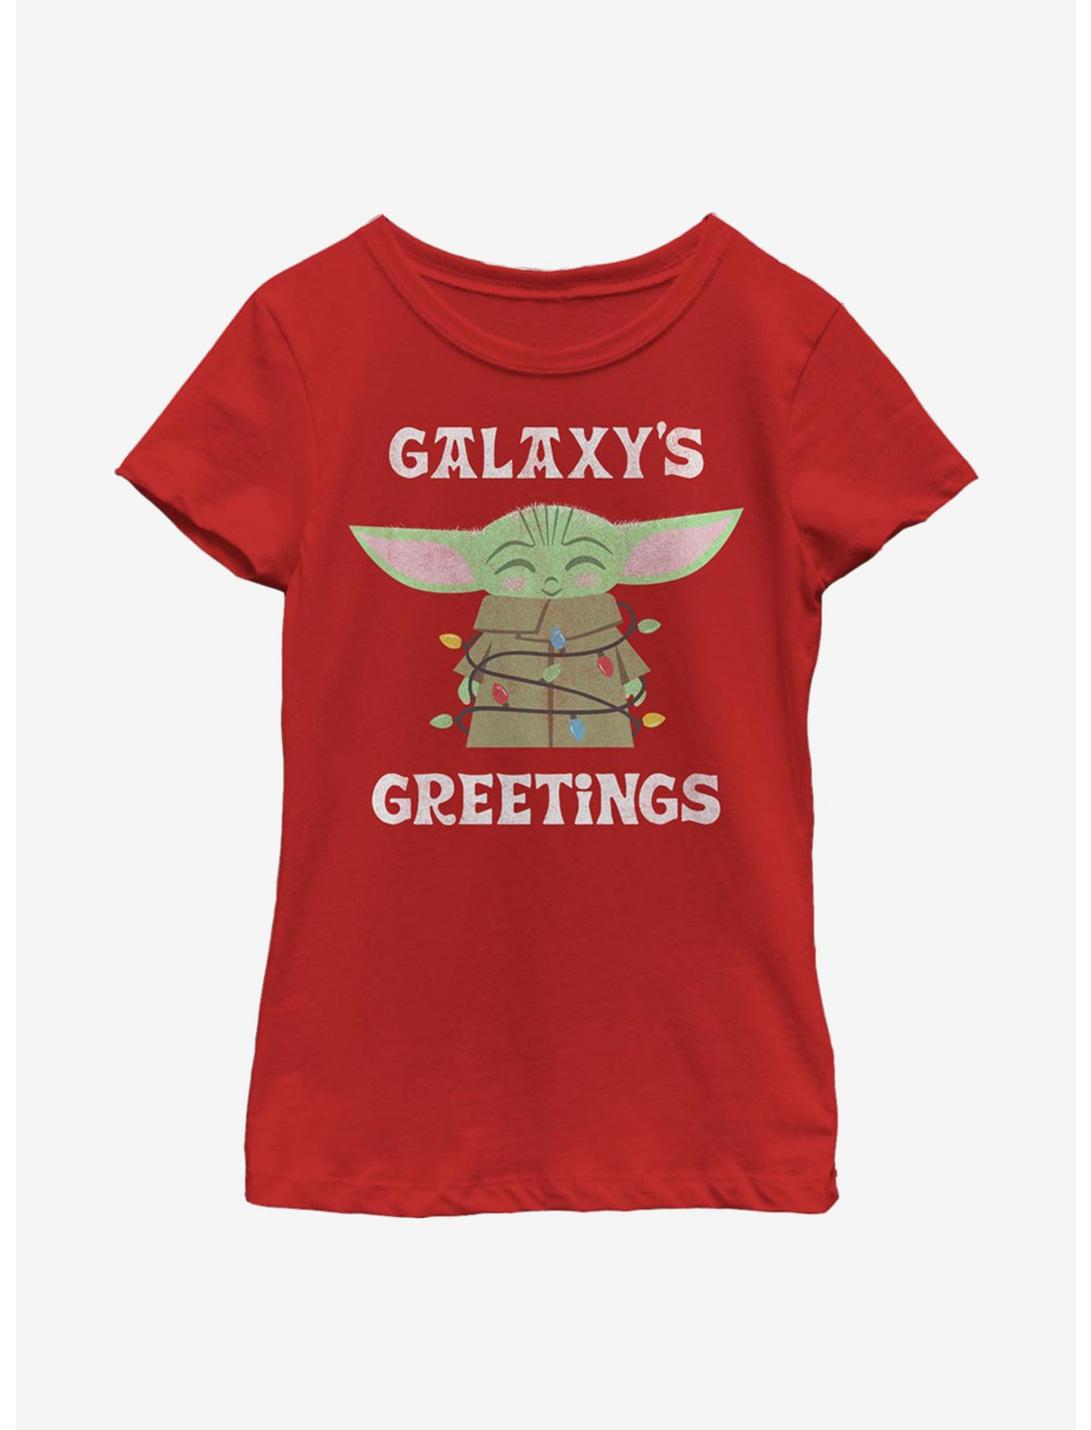 Star Wars The Mandalorian The Child Galaxy's Christmas Lights Youth Girls T-Shirt, RED, hi-res